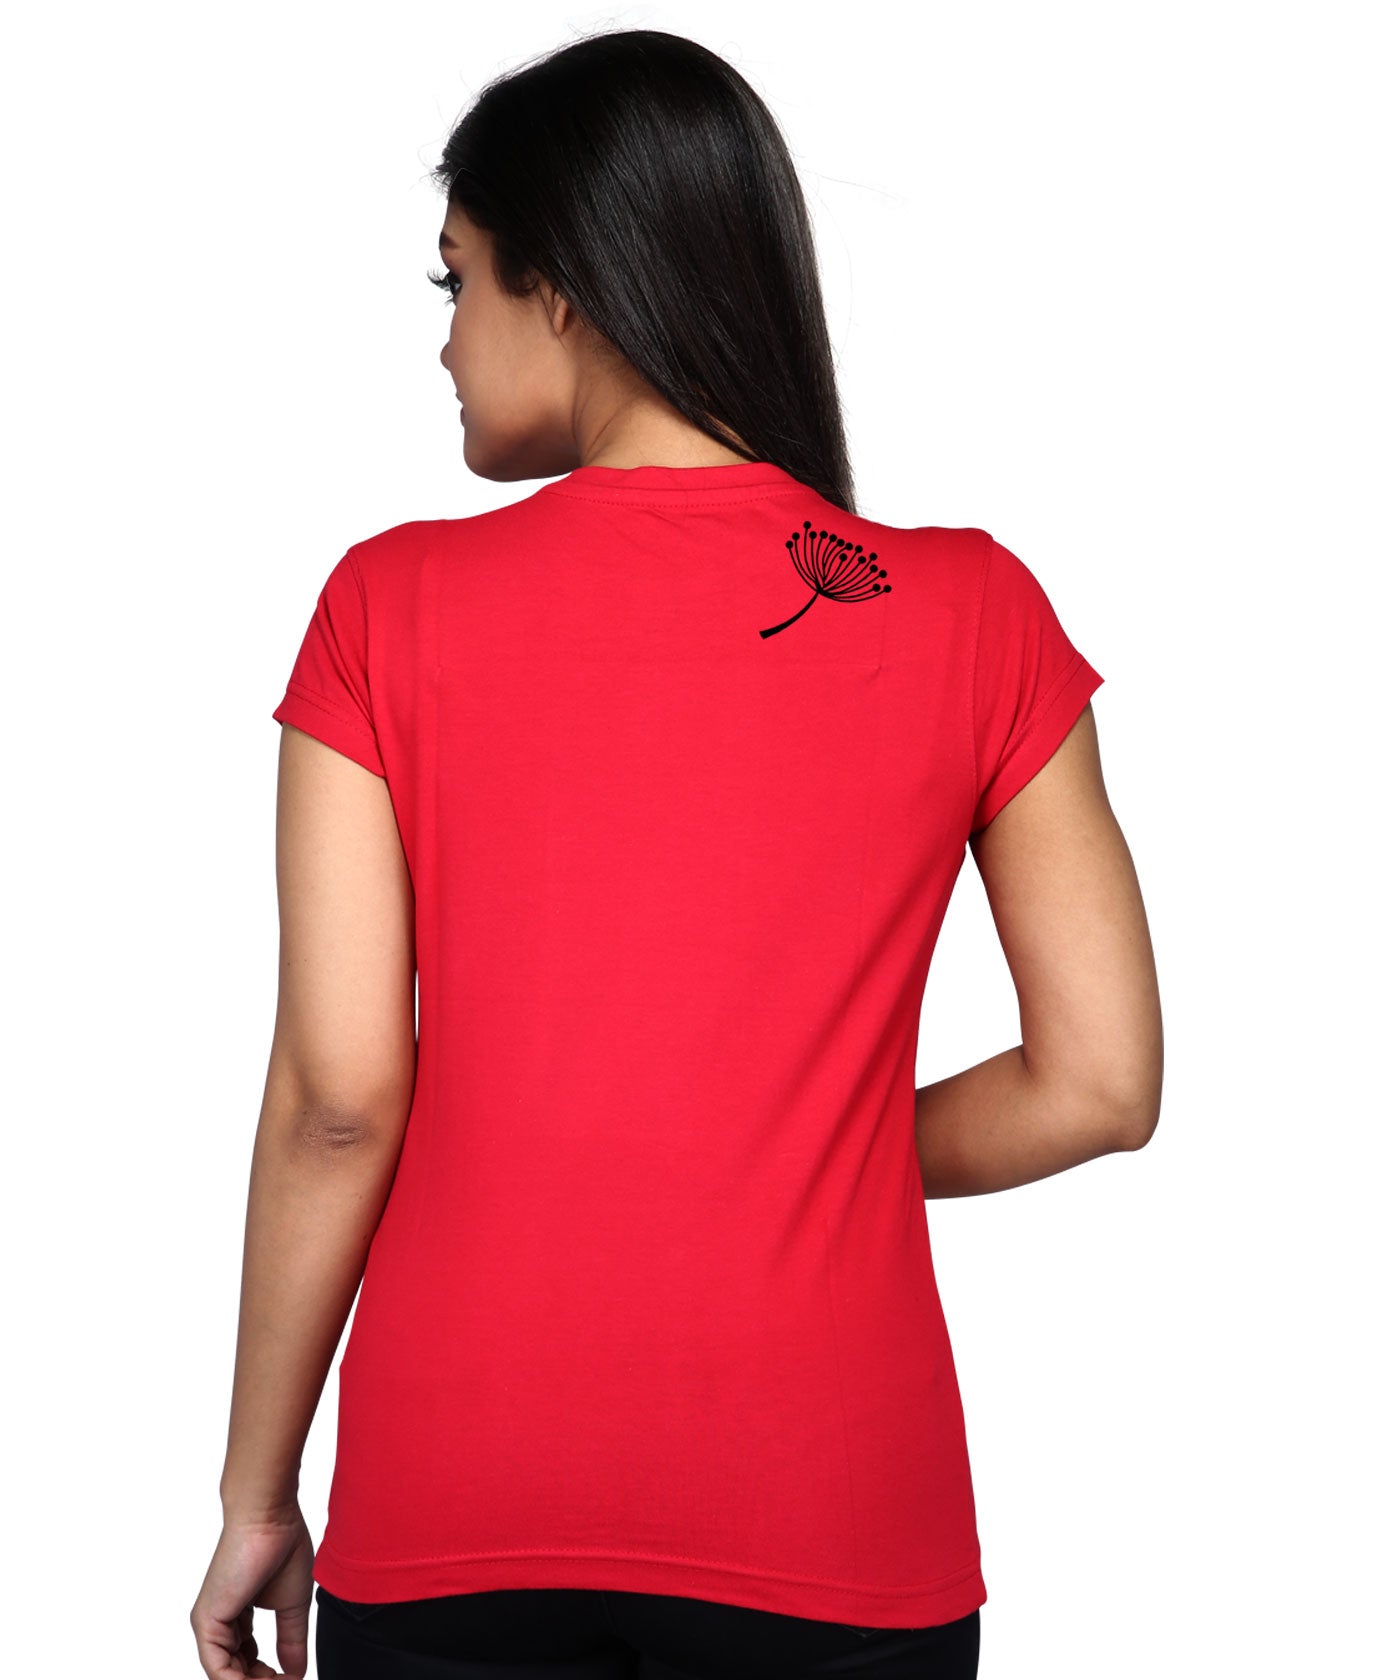 Lines - Block Print Tees for Women - Red